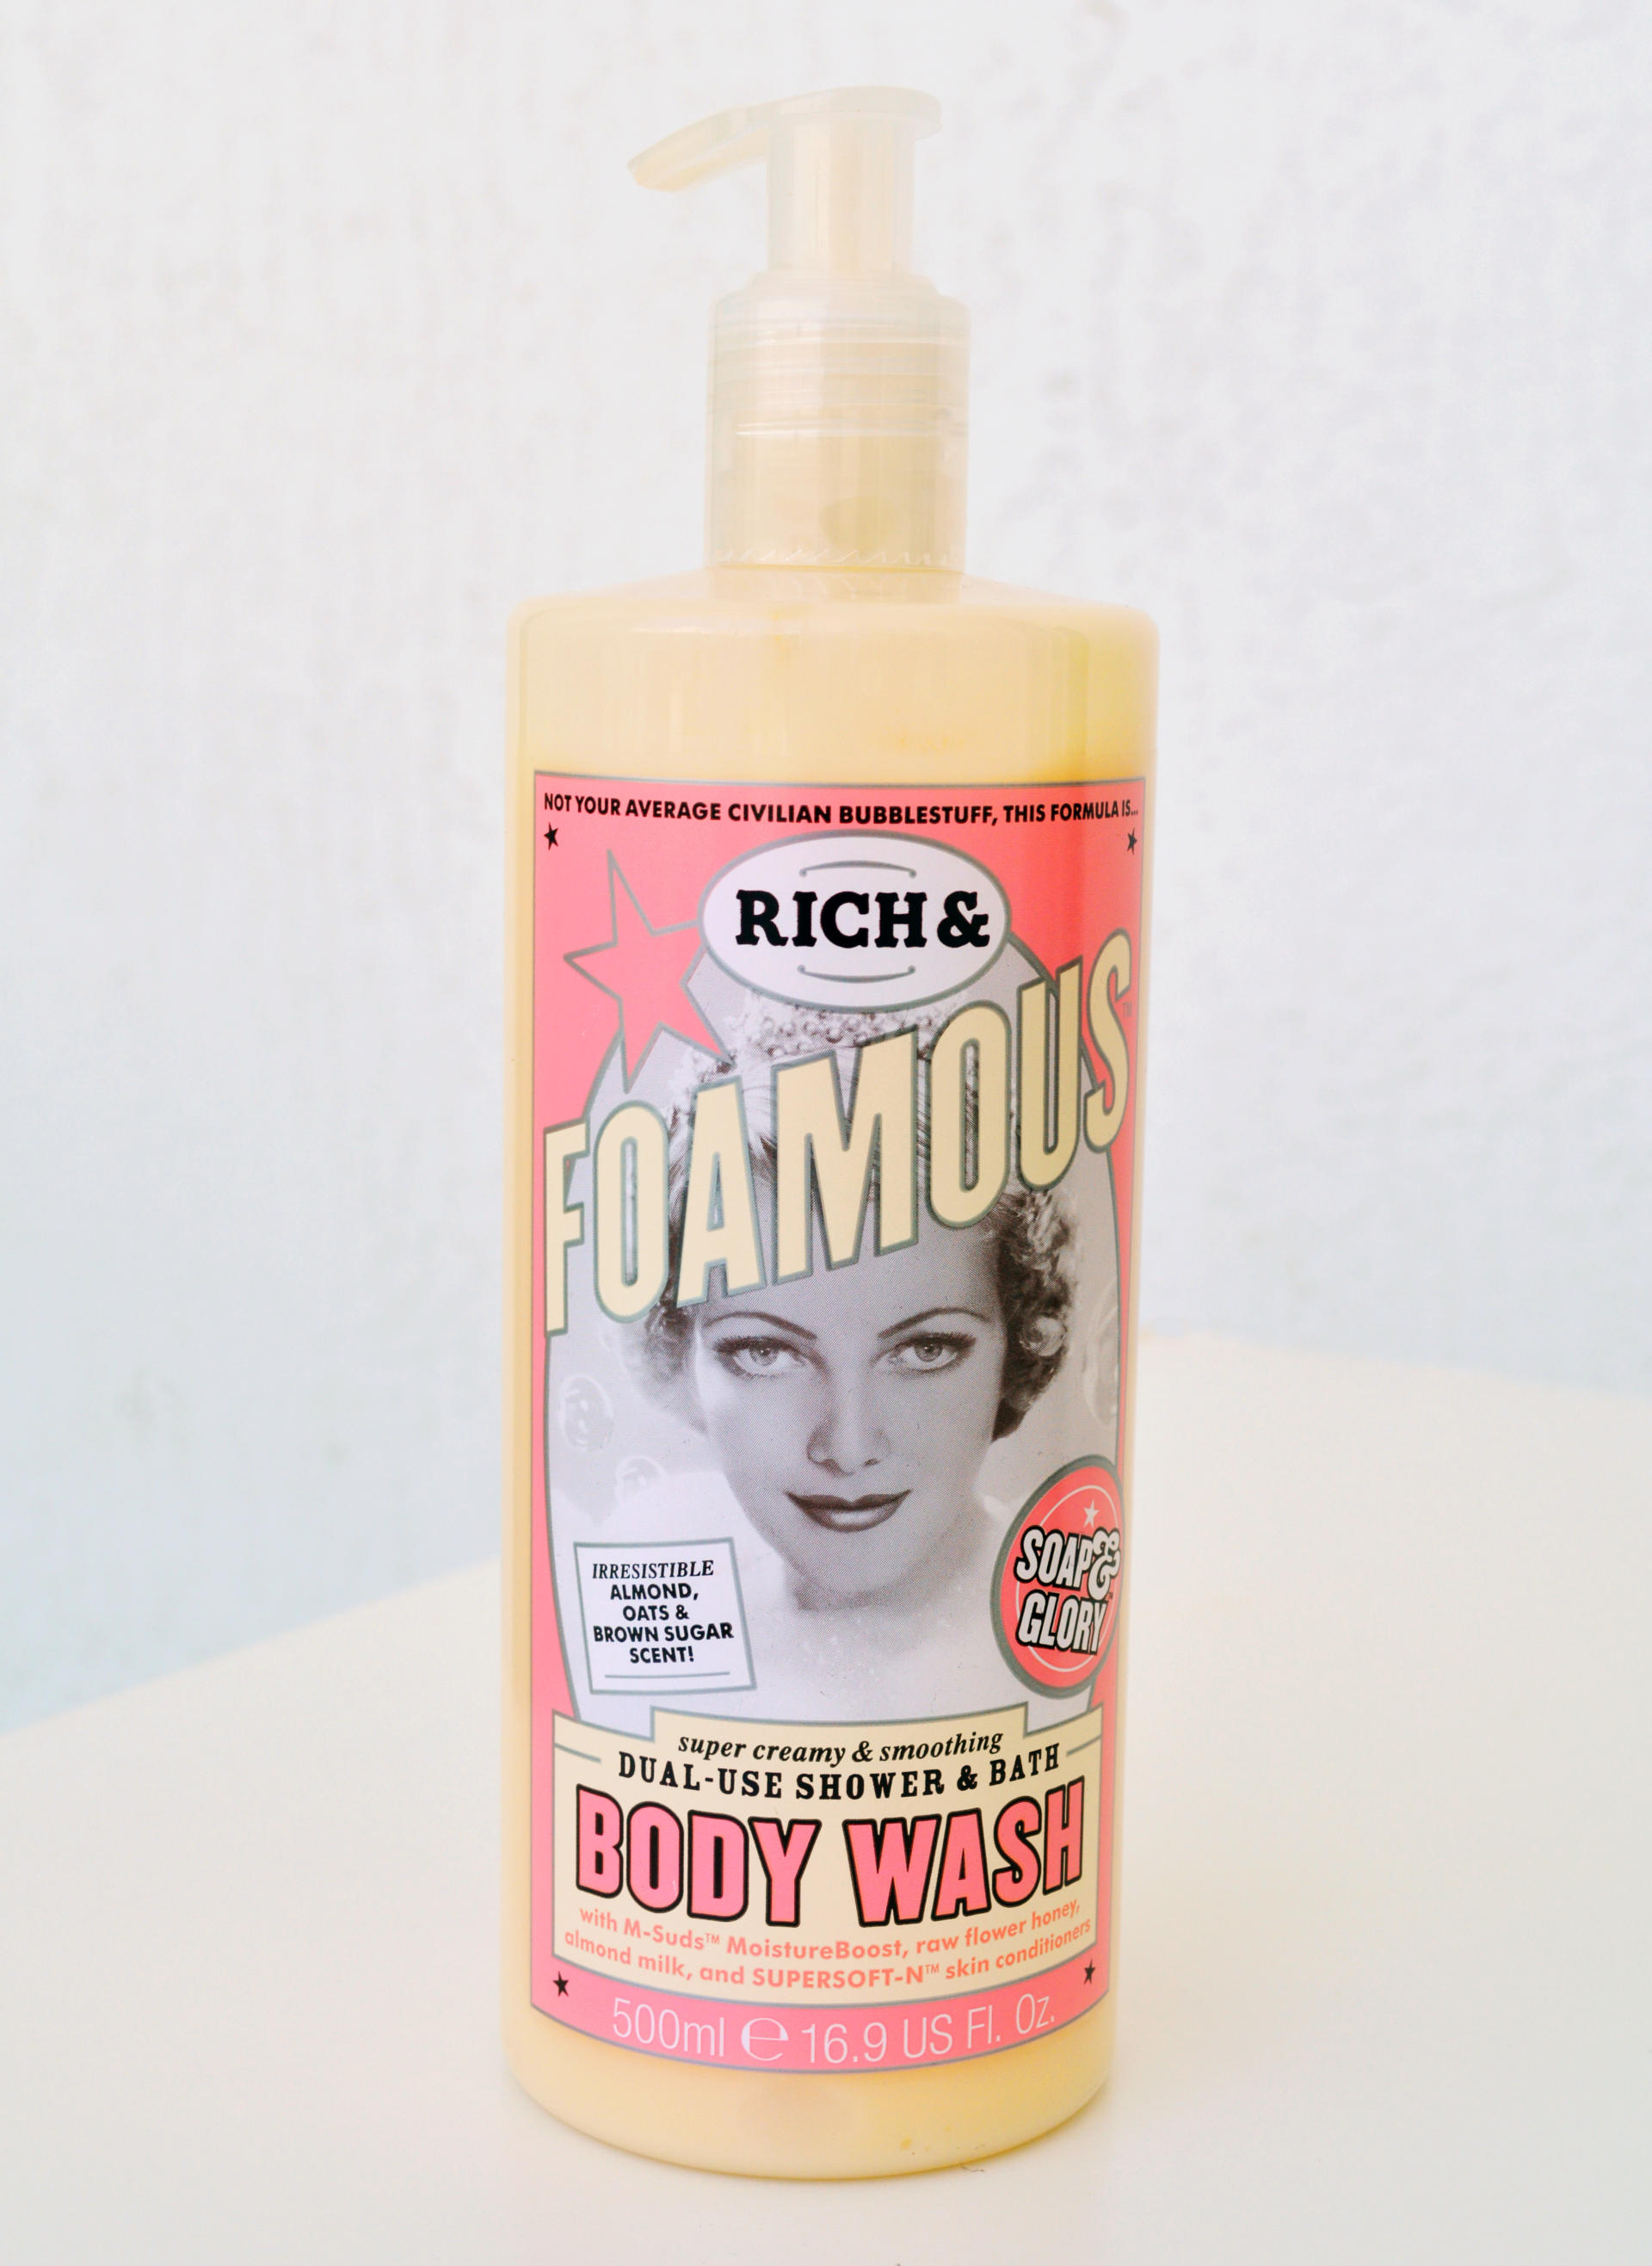  Soap & Glory Rich and Foamous Body Wash